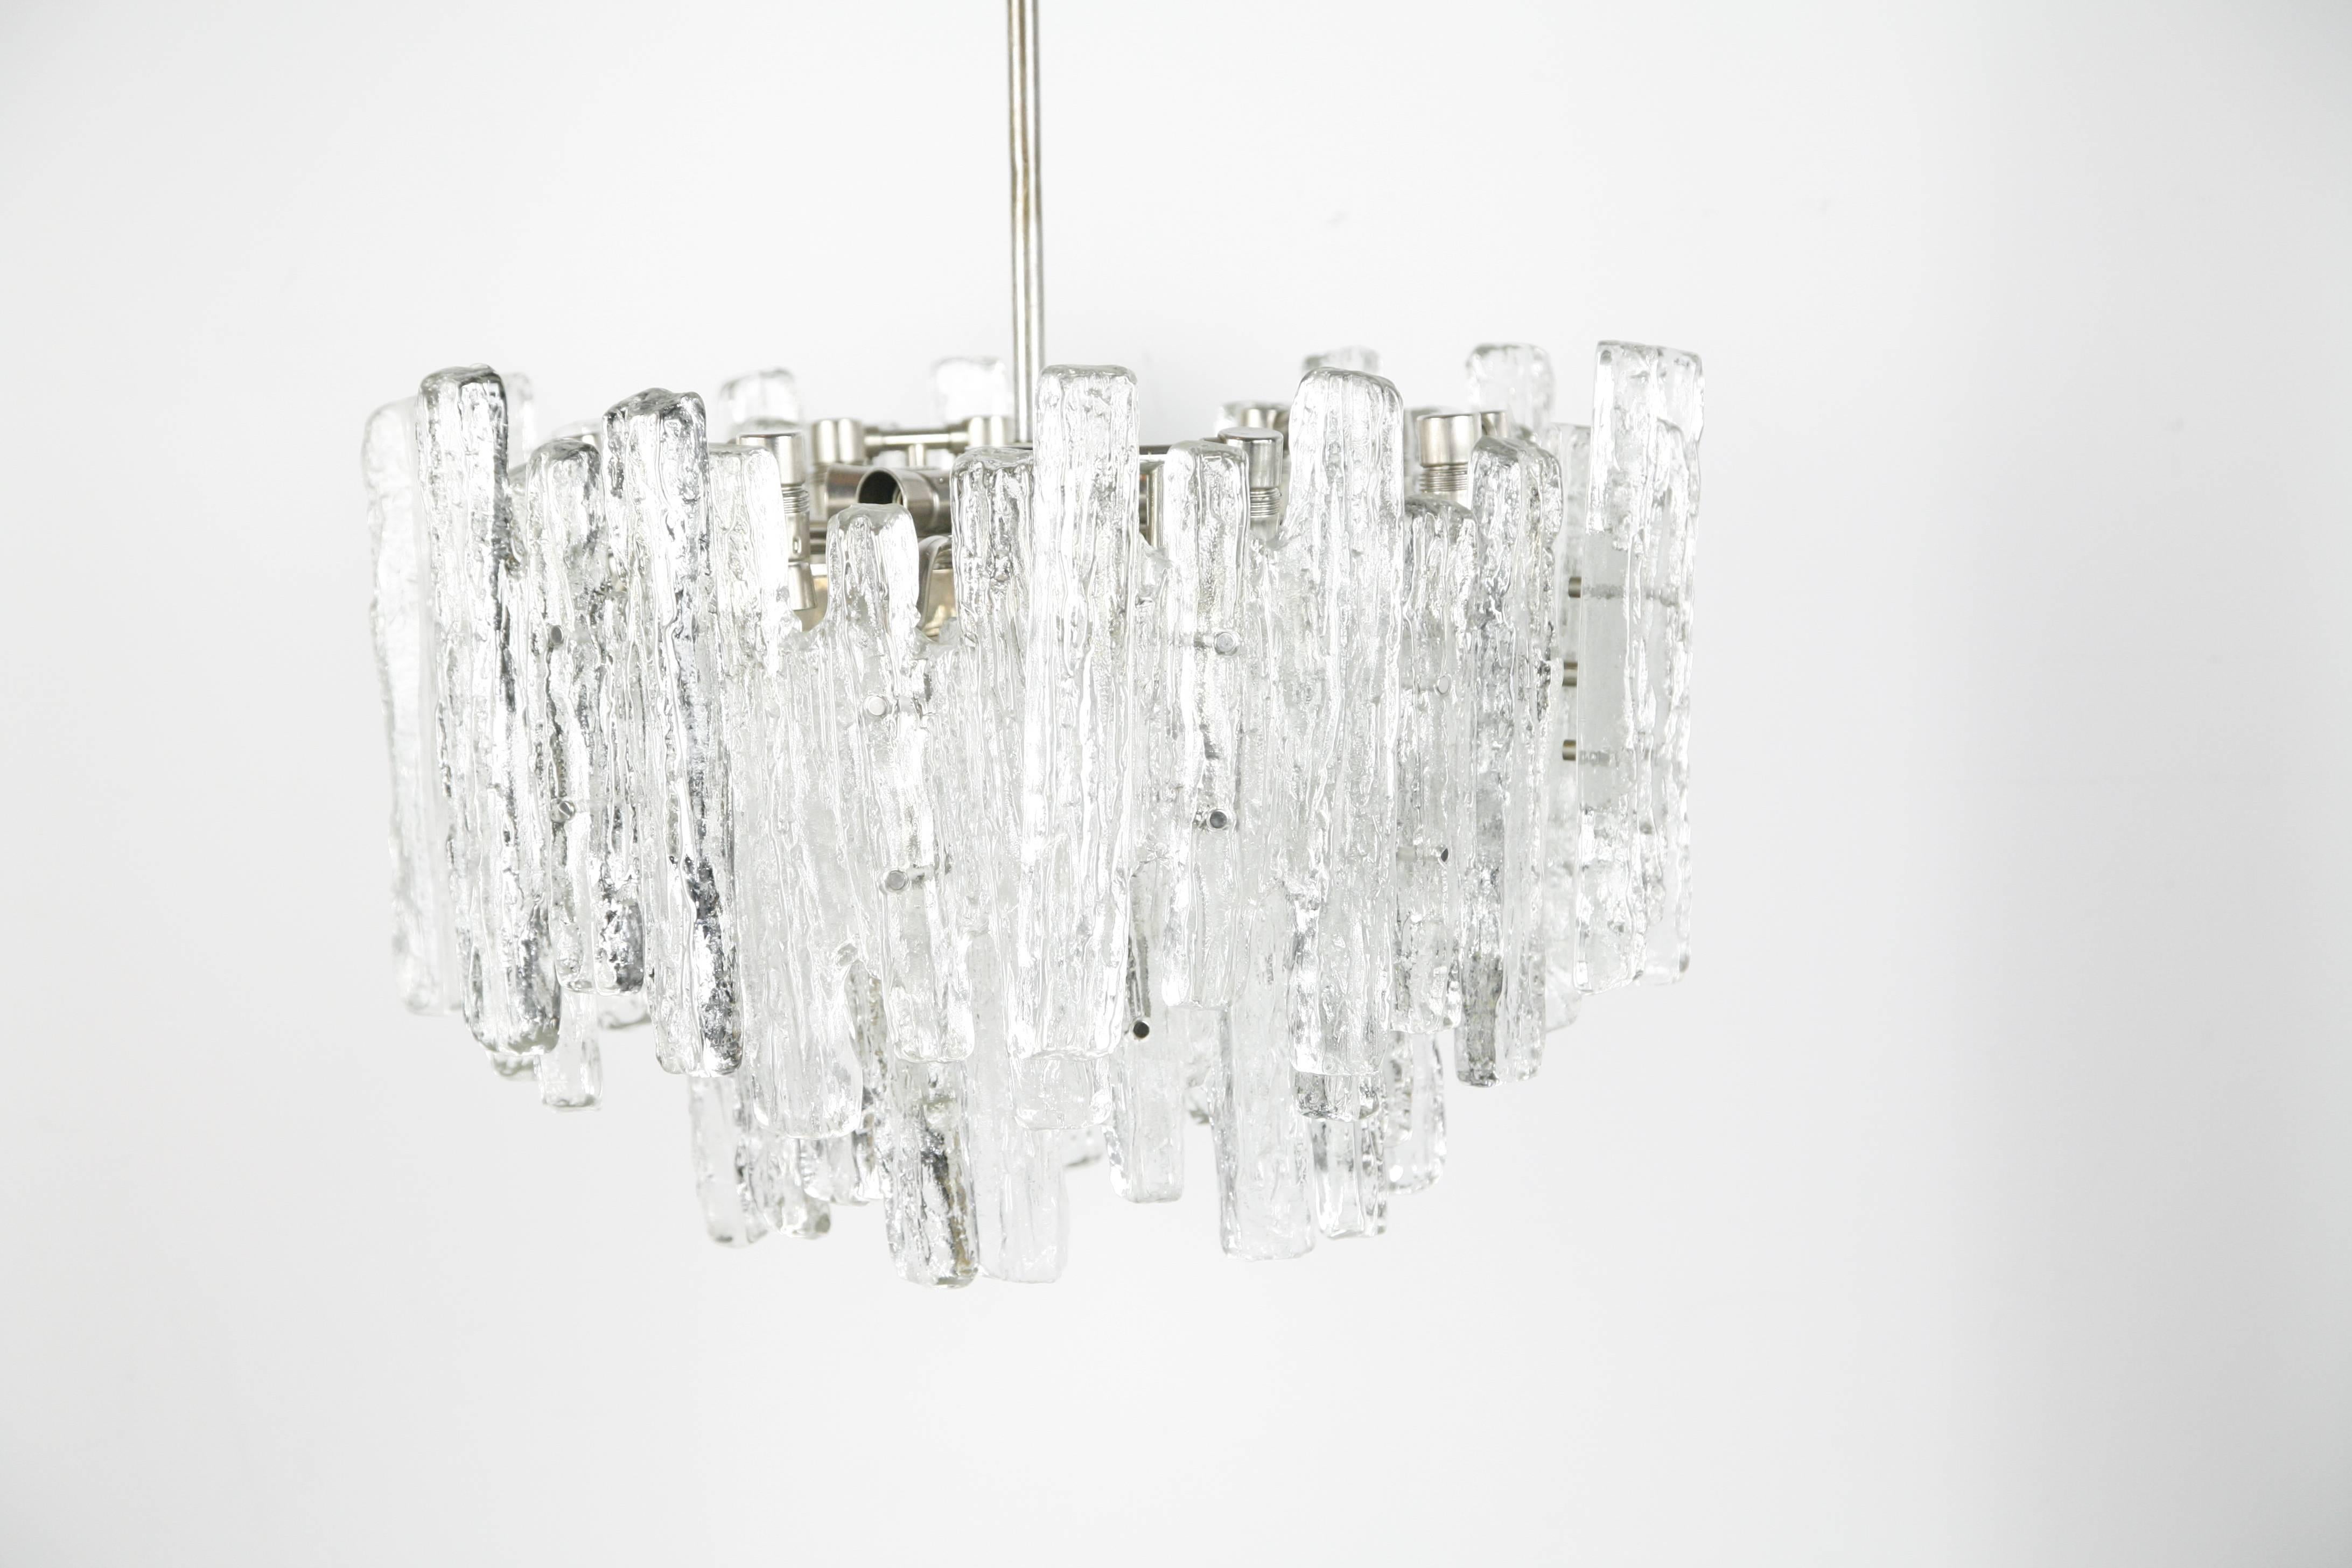 Kalmar matte ice glass chandelier from the 1960s, Austria.
A metal frame holding 18 pieces of thick ice looking glass with a matte organically shape, the inside of the glass is clear and flat, there is six original European light sources that